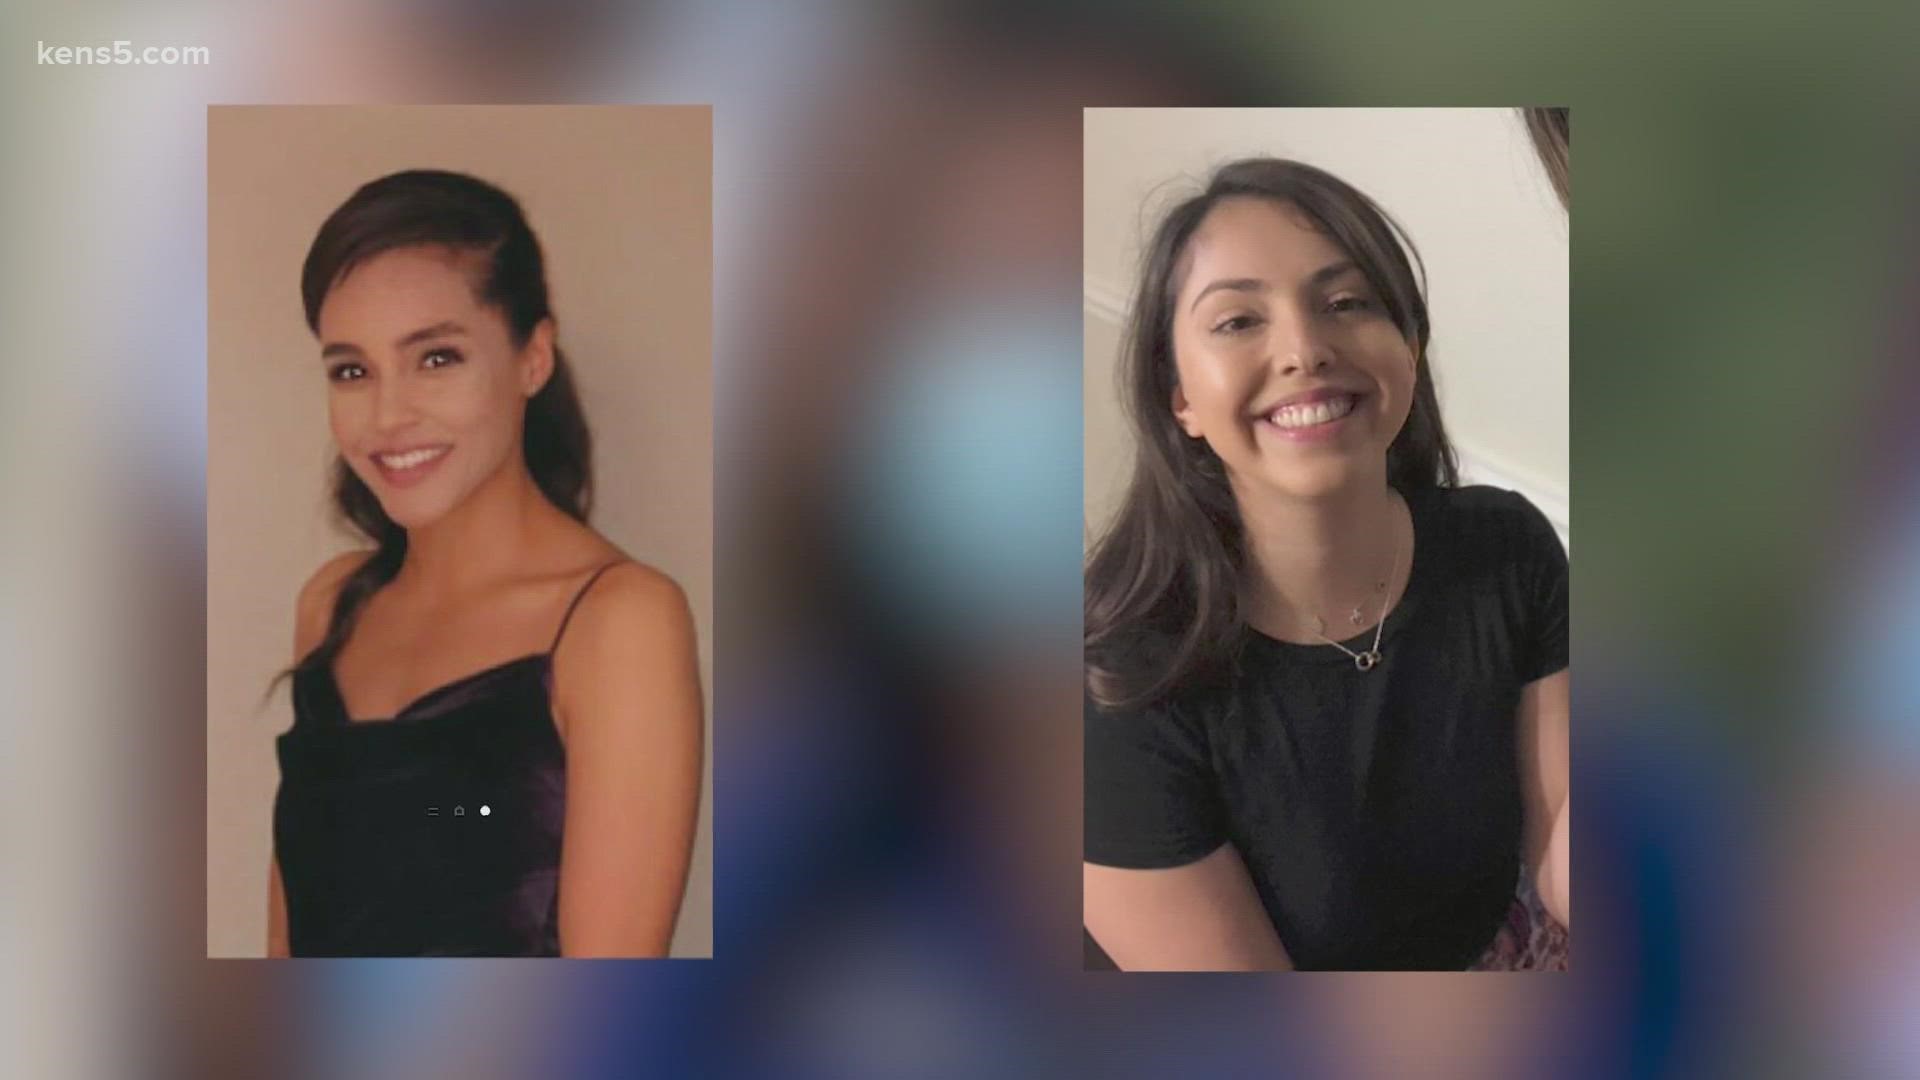 25-year-old Daniela Lute and 26-year-old Diana Rubio were described as caring, fun and free-spirited young women.